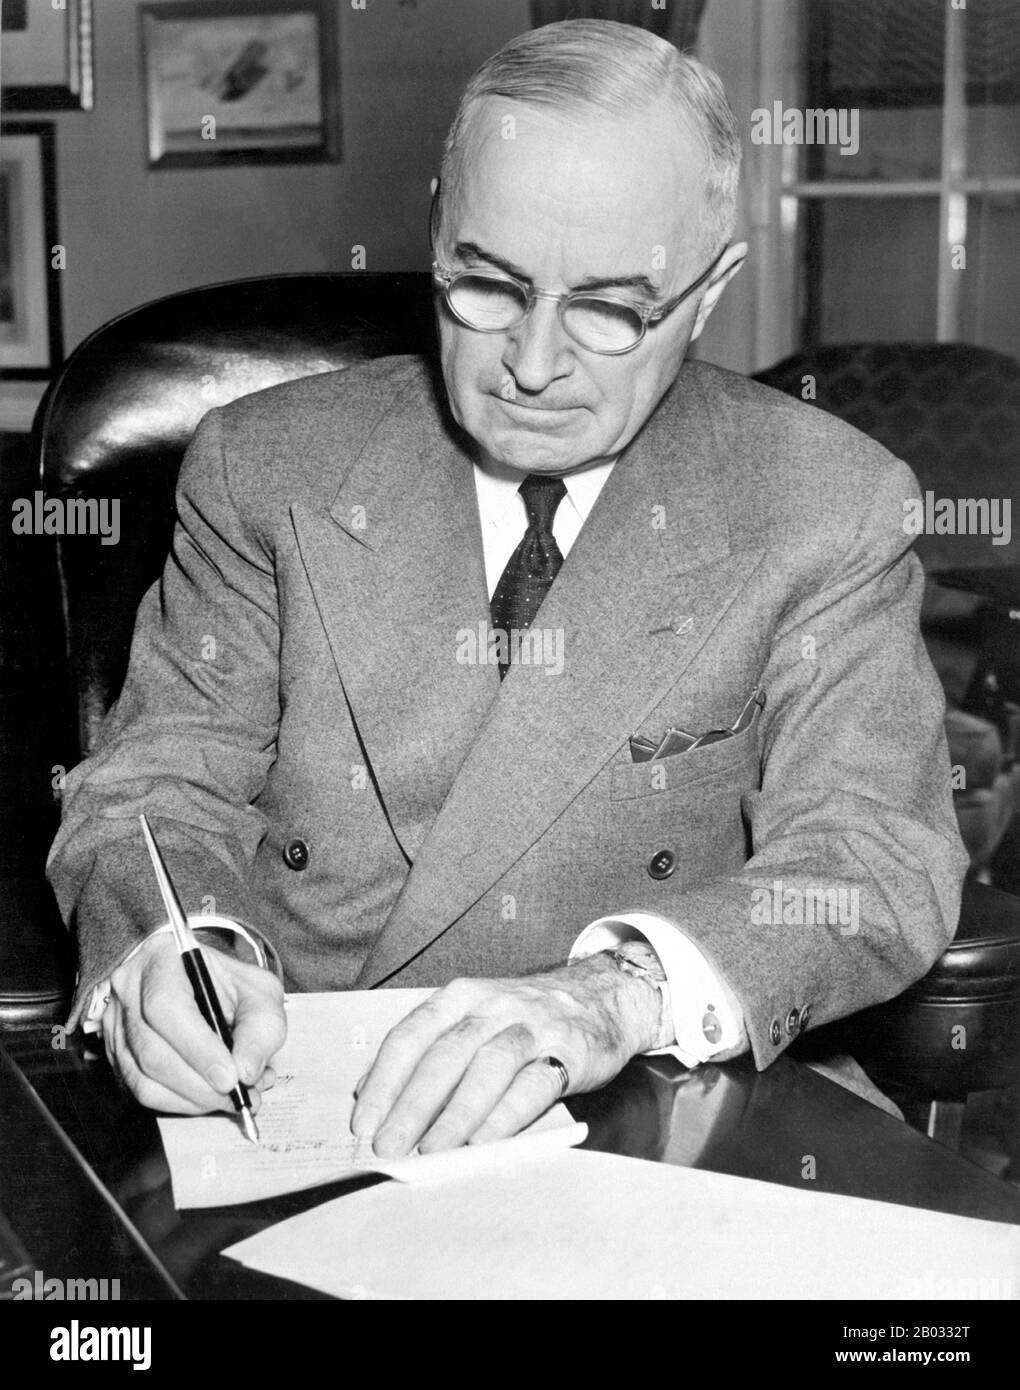 Harry S. Truman (May 8, 1884 – December 26, 1972) was the 33rd President of the United States (1945–53), an American politician of the Democratic Party. He served as a United States Senator from Missouri (1935–45) and briefly as Vice President (1945) before he succeeded to the presidency on April 12, 1945 upon the death of Franklin D. Roosevelt.  He was president during the final months of World War II, making the decision to drop the atomic bomb on Hiroshima and Nagasaki. Truman was elected in his own right in 1948. He presided over an uncertain domestic scene as America sought its path after Stock Photo